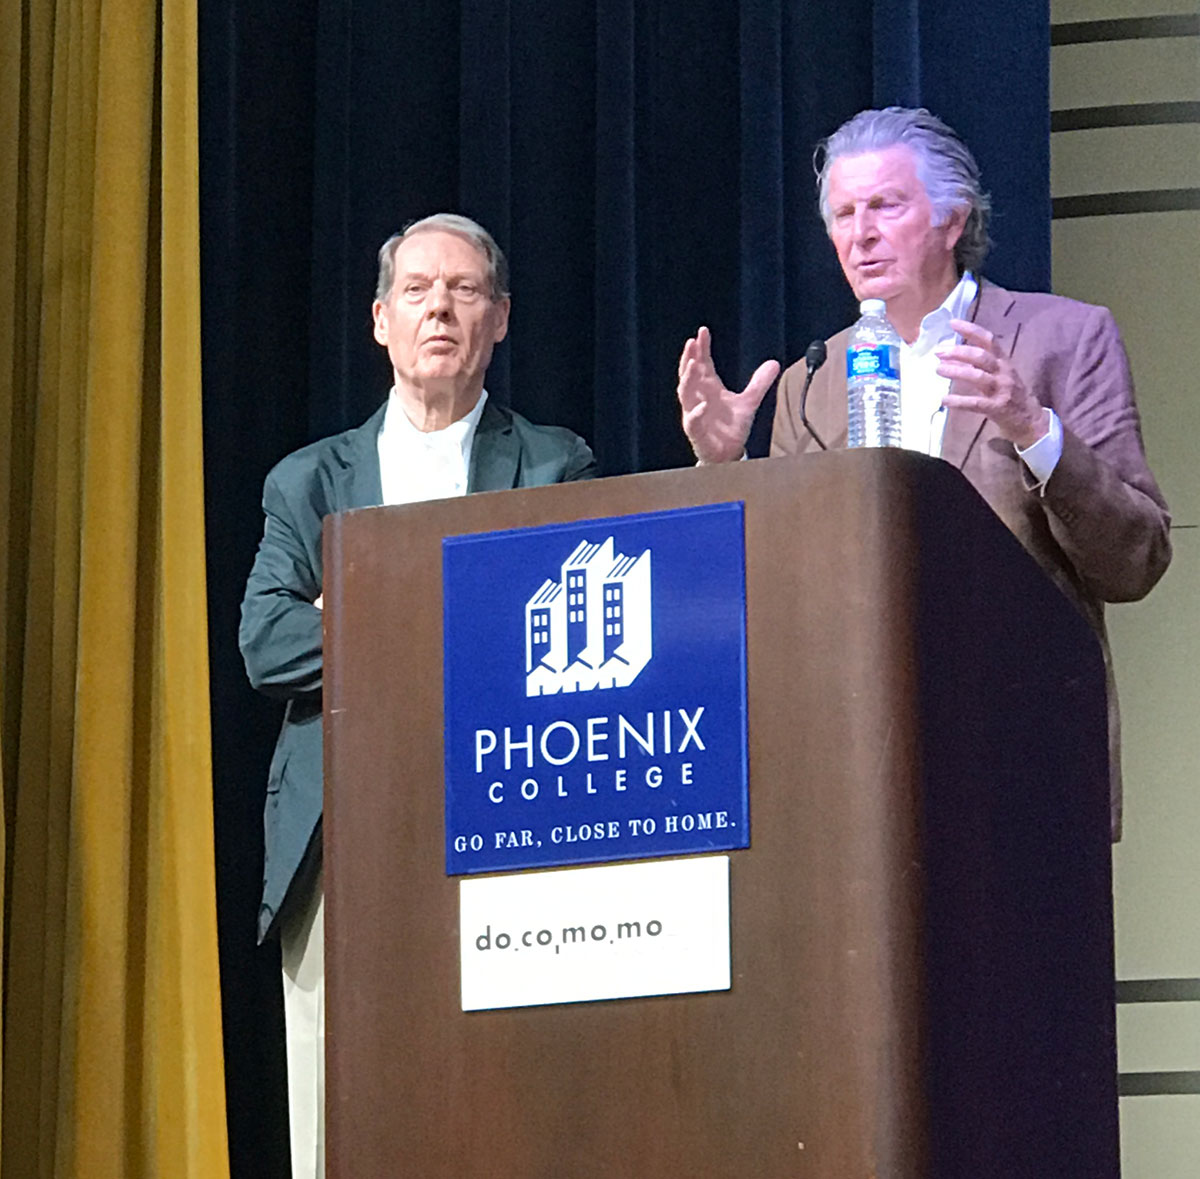 The National Symposium during the 2017 Modern Phoenix Week